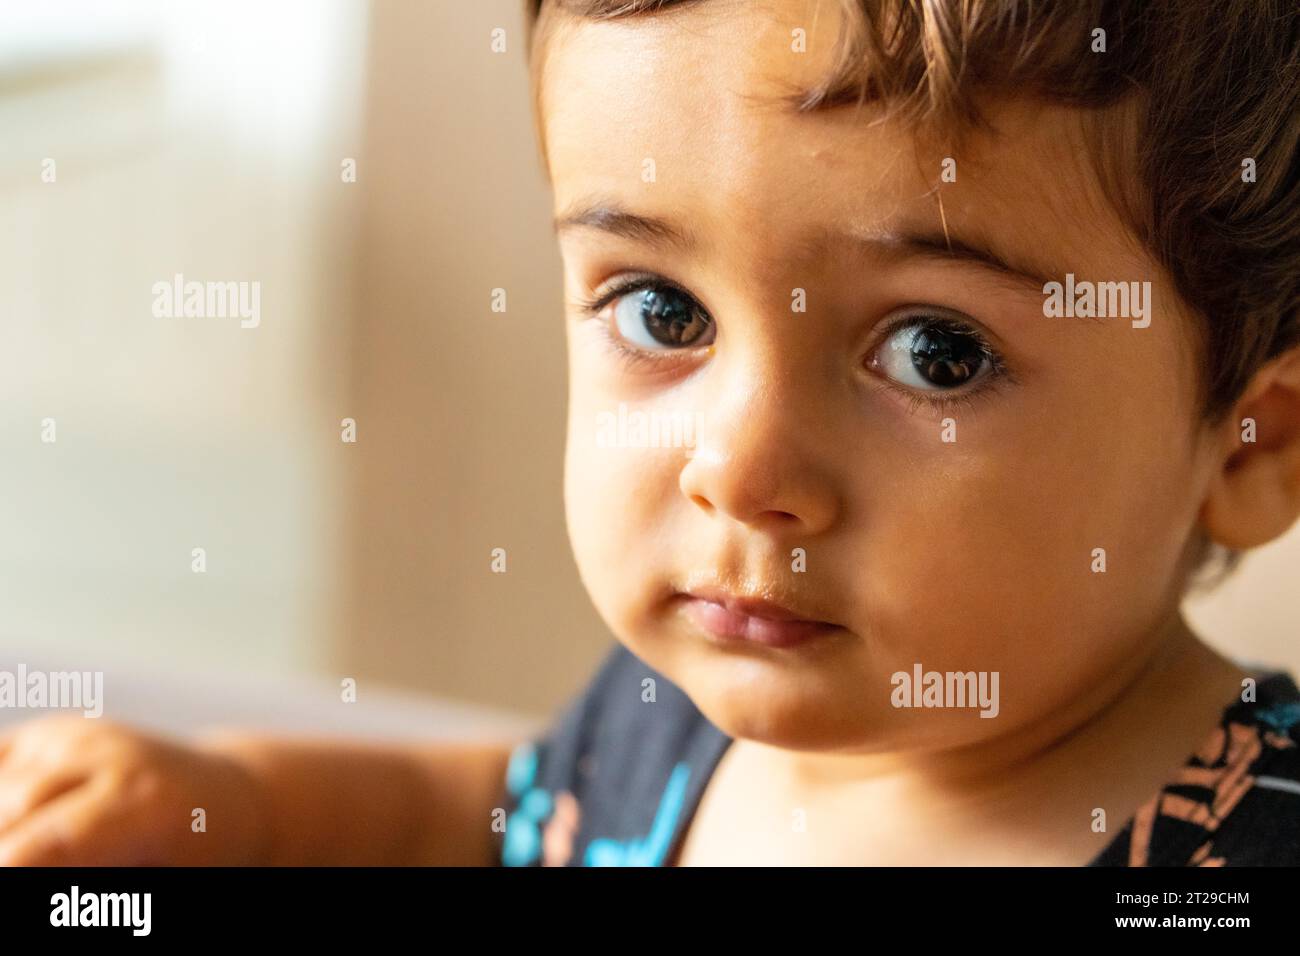 Portrait of a one year old Caucasian boy looking at the camera Stock Photo